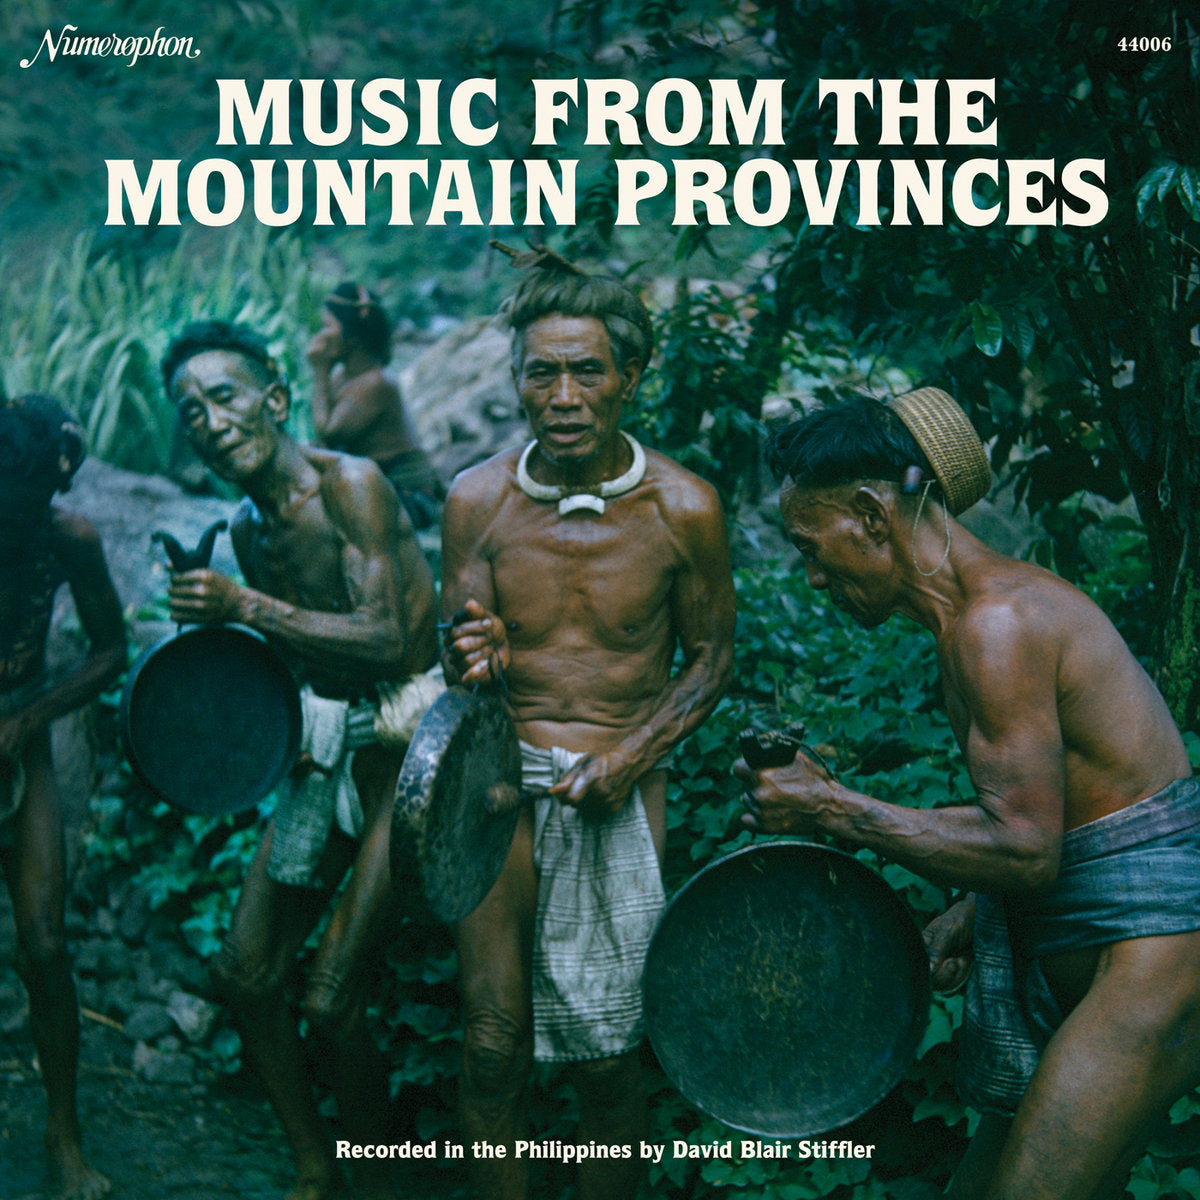 Recorded in the Philippines by David Blair Stiffler